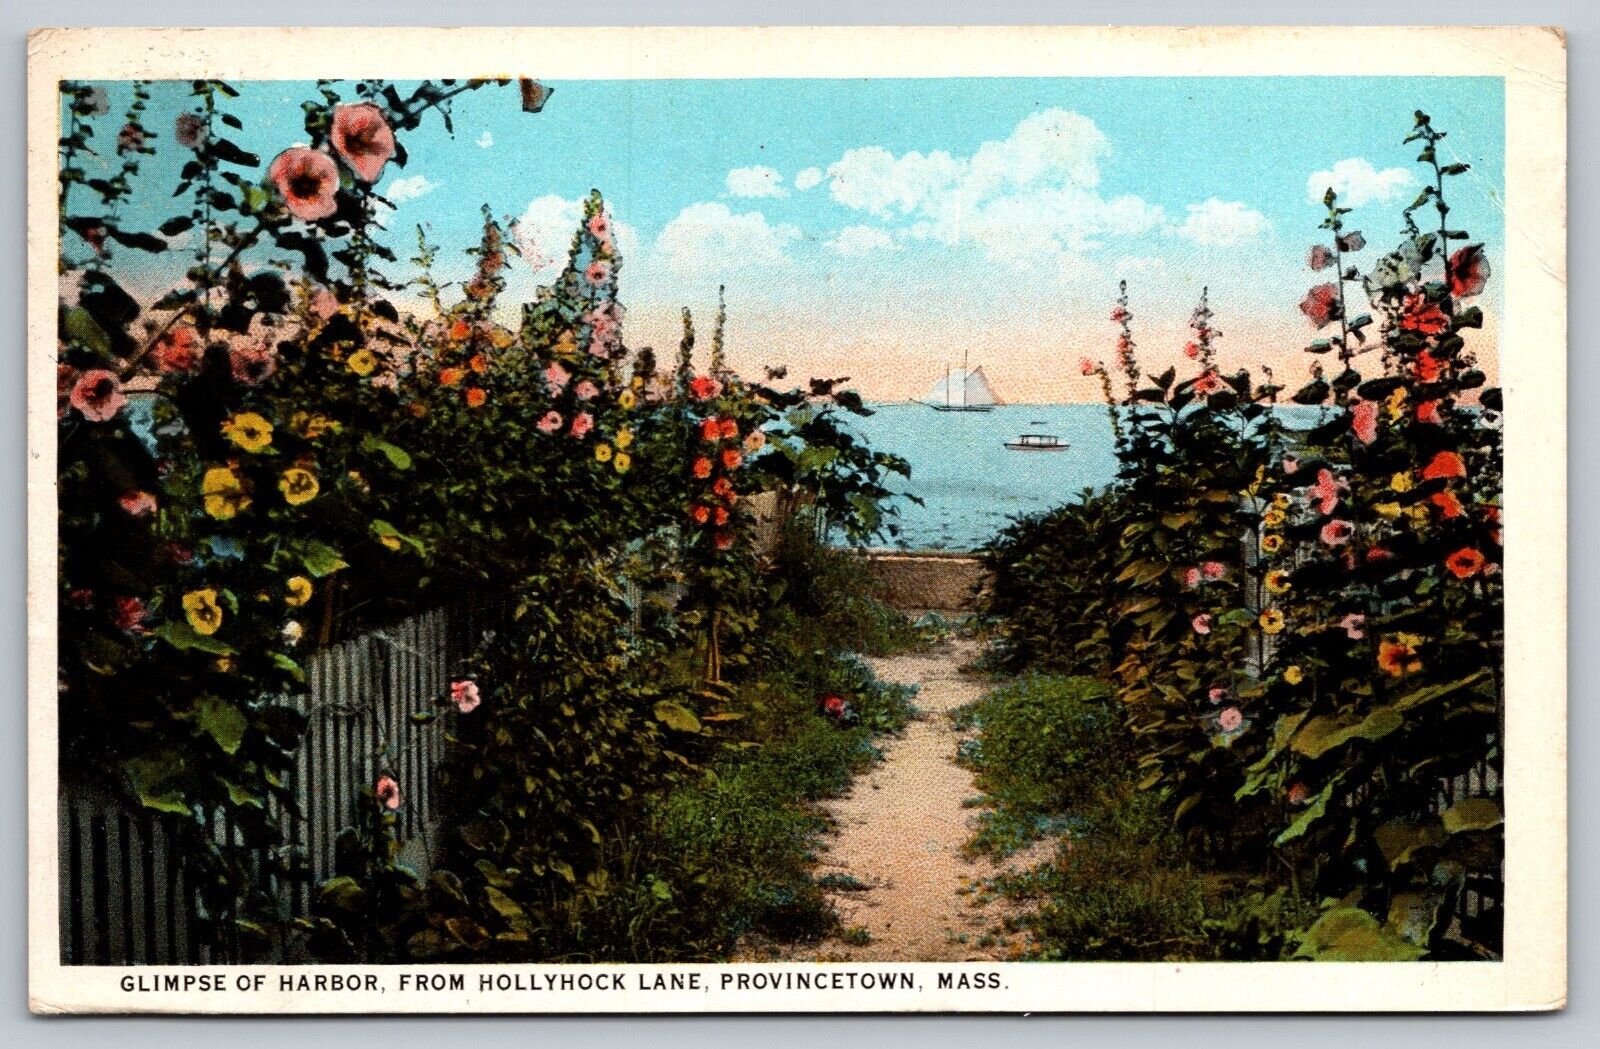 PROVINCETOWN MA - 1932 POSTCARD - HARBOR FROM HOLLYHOCK LANE